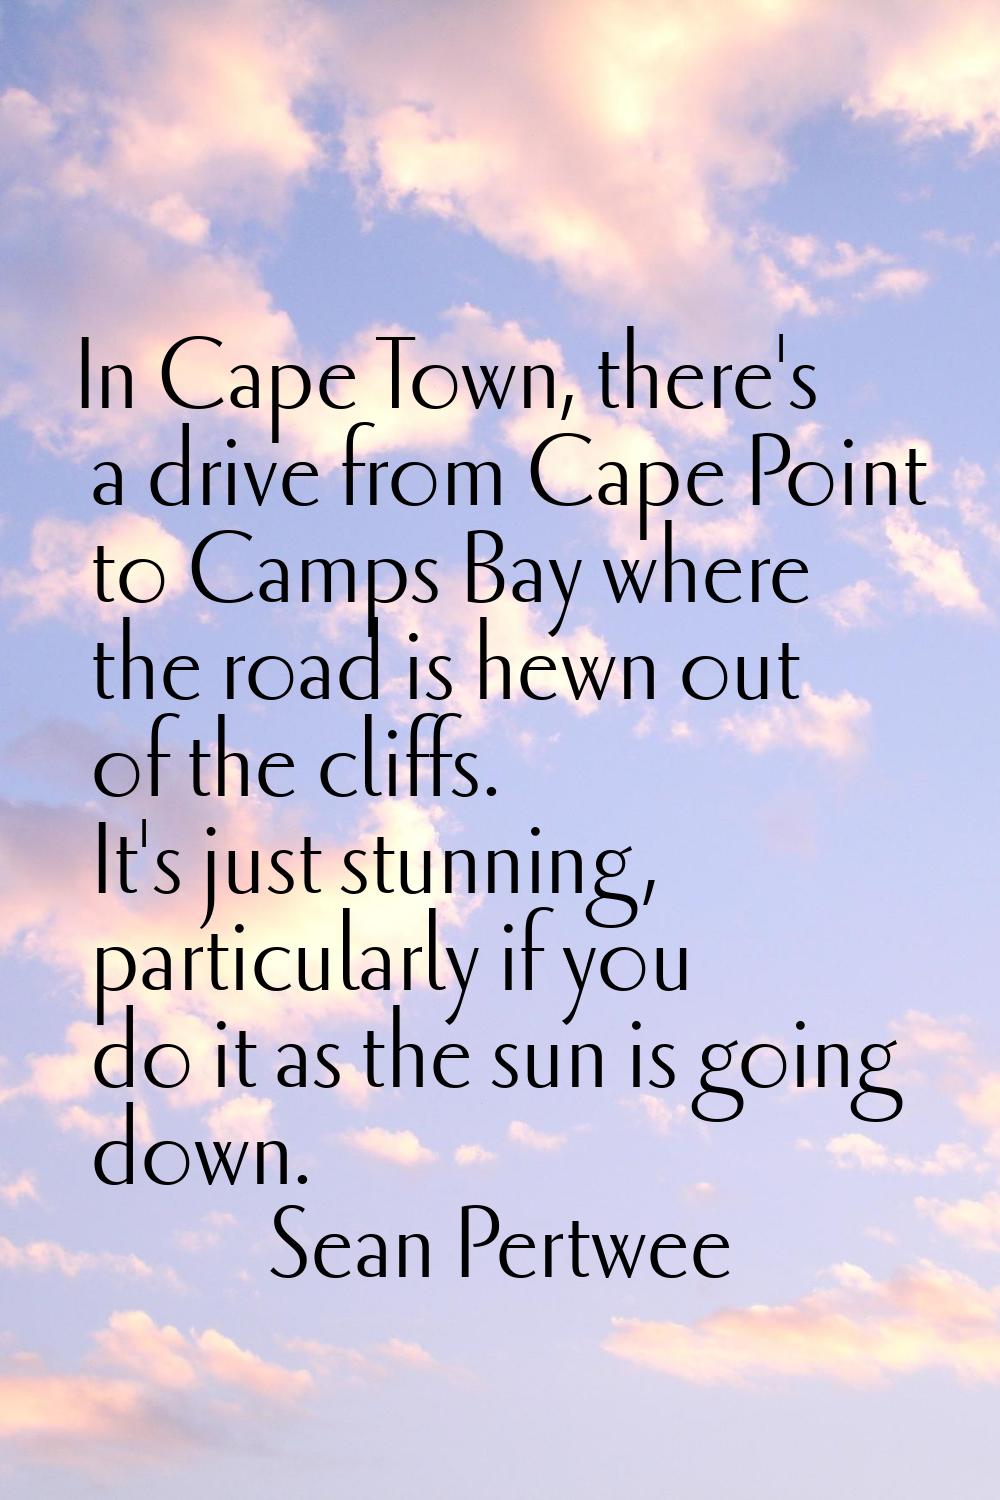 In Cape Town, there's a drive from Cape Point to Camps Bay where the road is hewn out of the cliffs